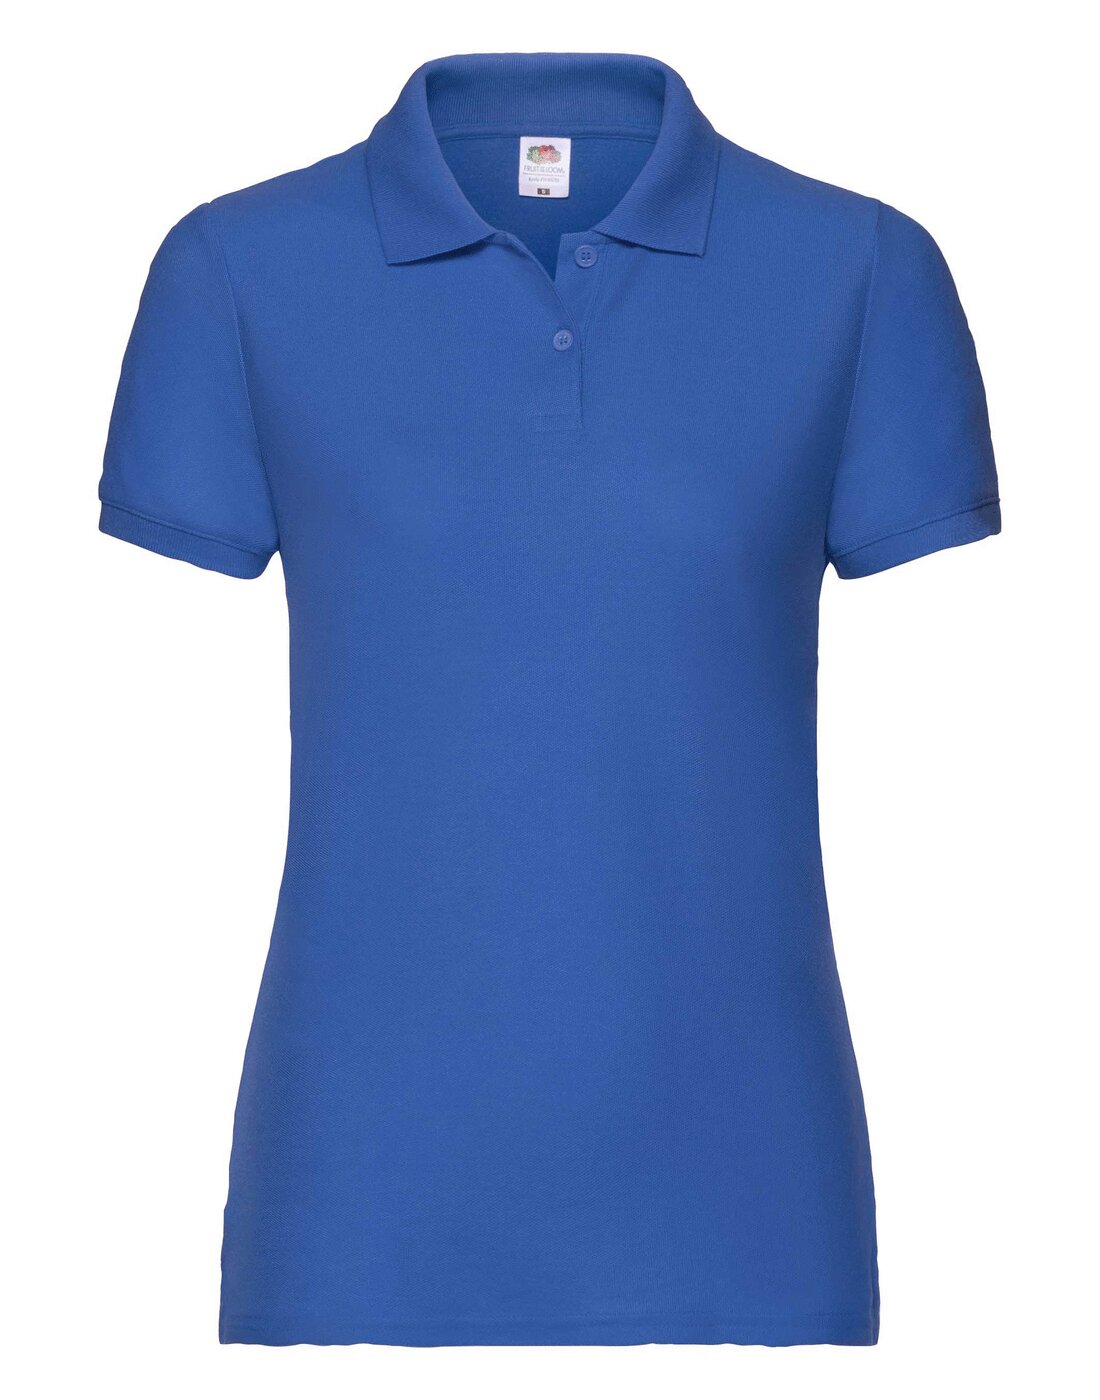 Fruit of the Loom Ladies 65/35 Polo - Royal